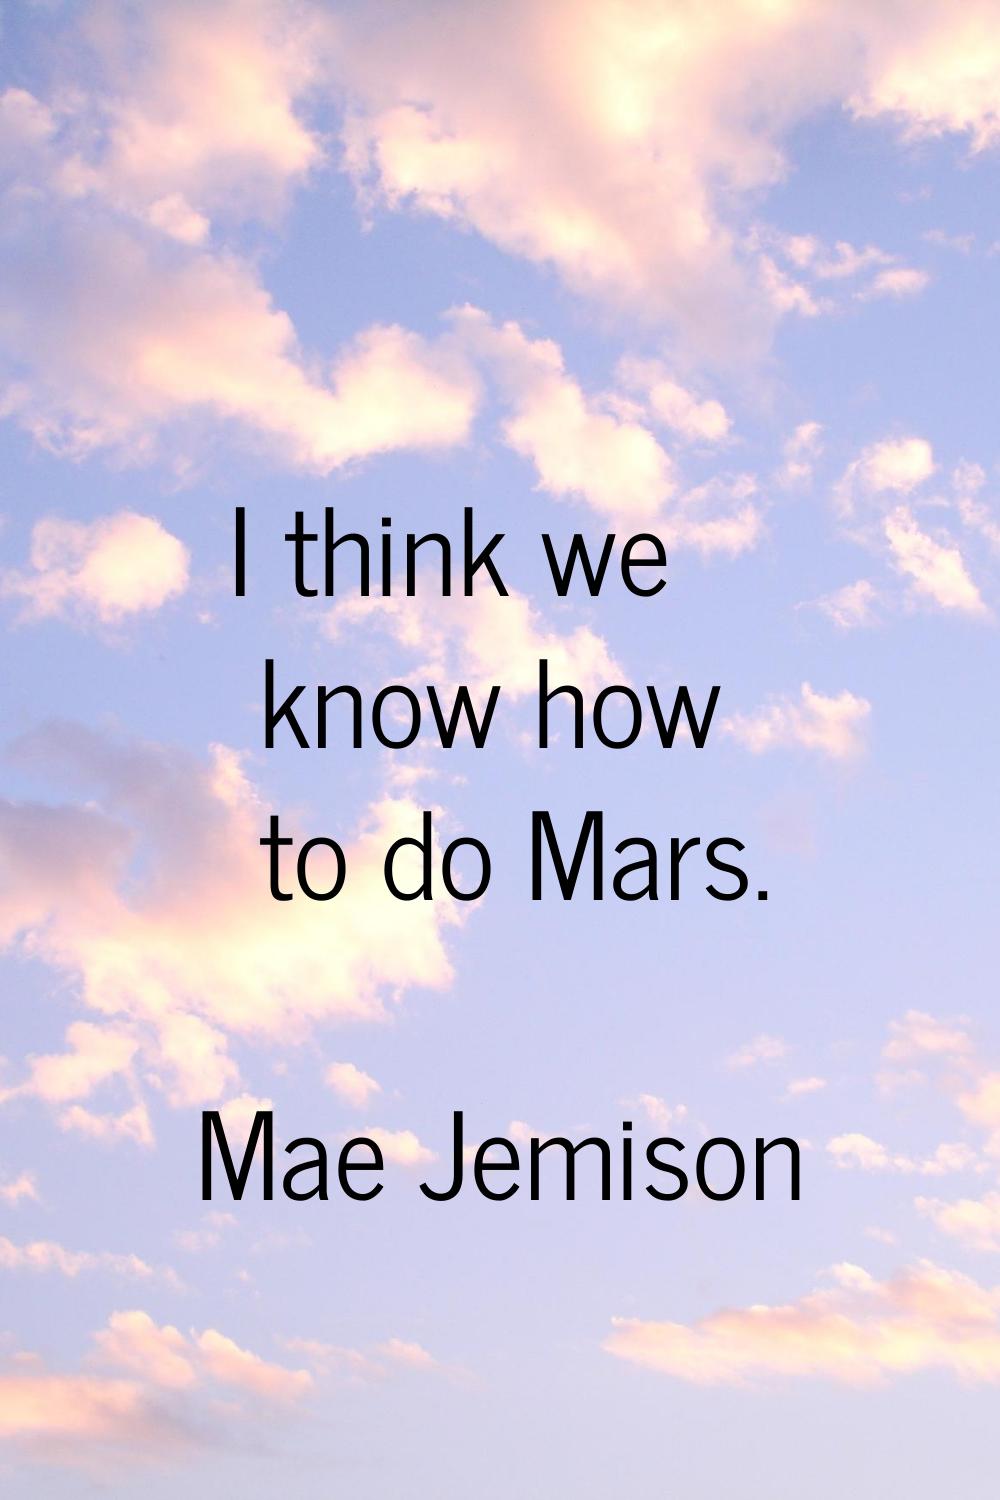 I think we know how to do Mars.